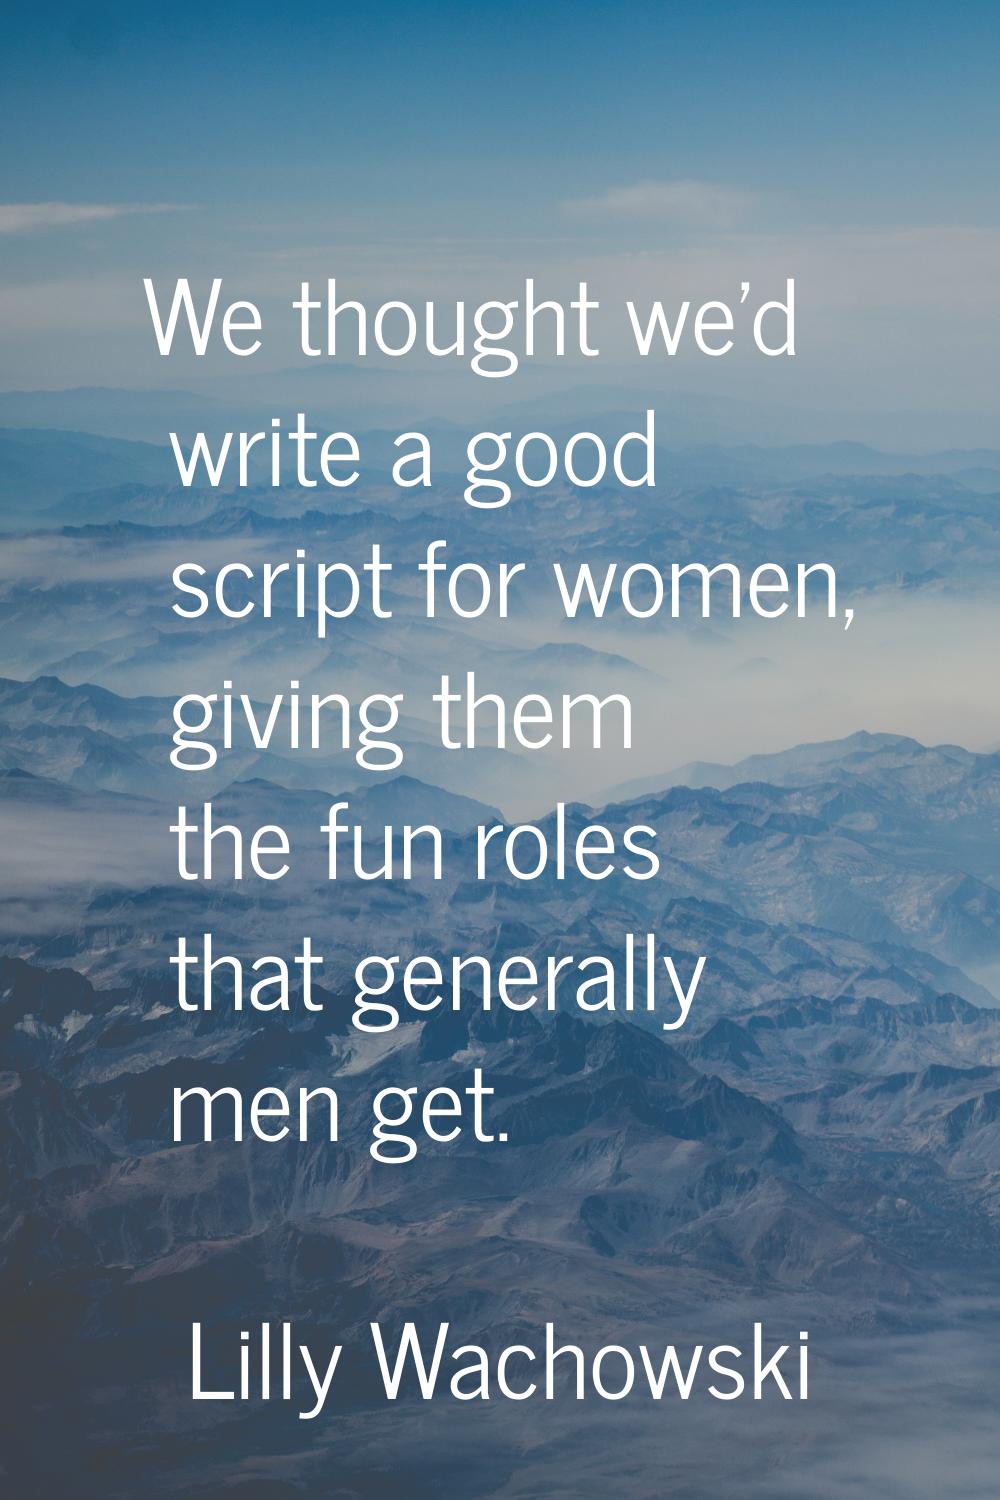 We thought we'd write a good script for women, giving them the fun roles that generally men get.